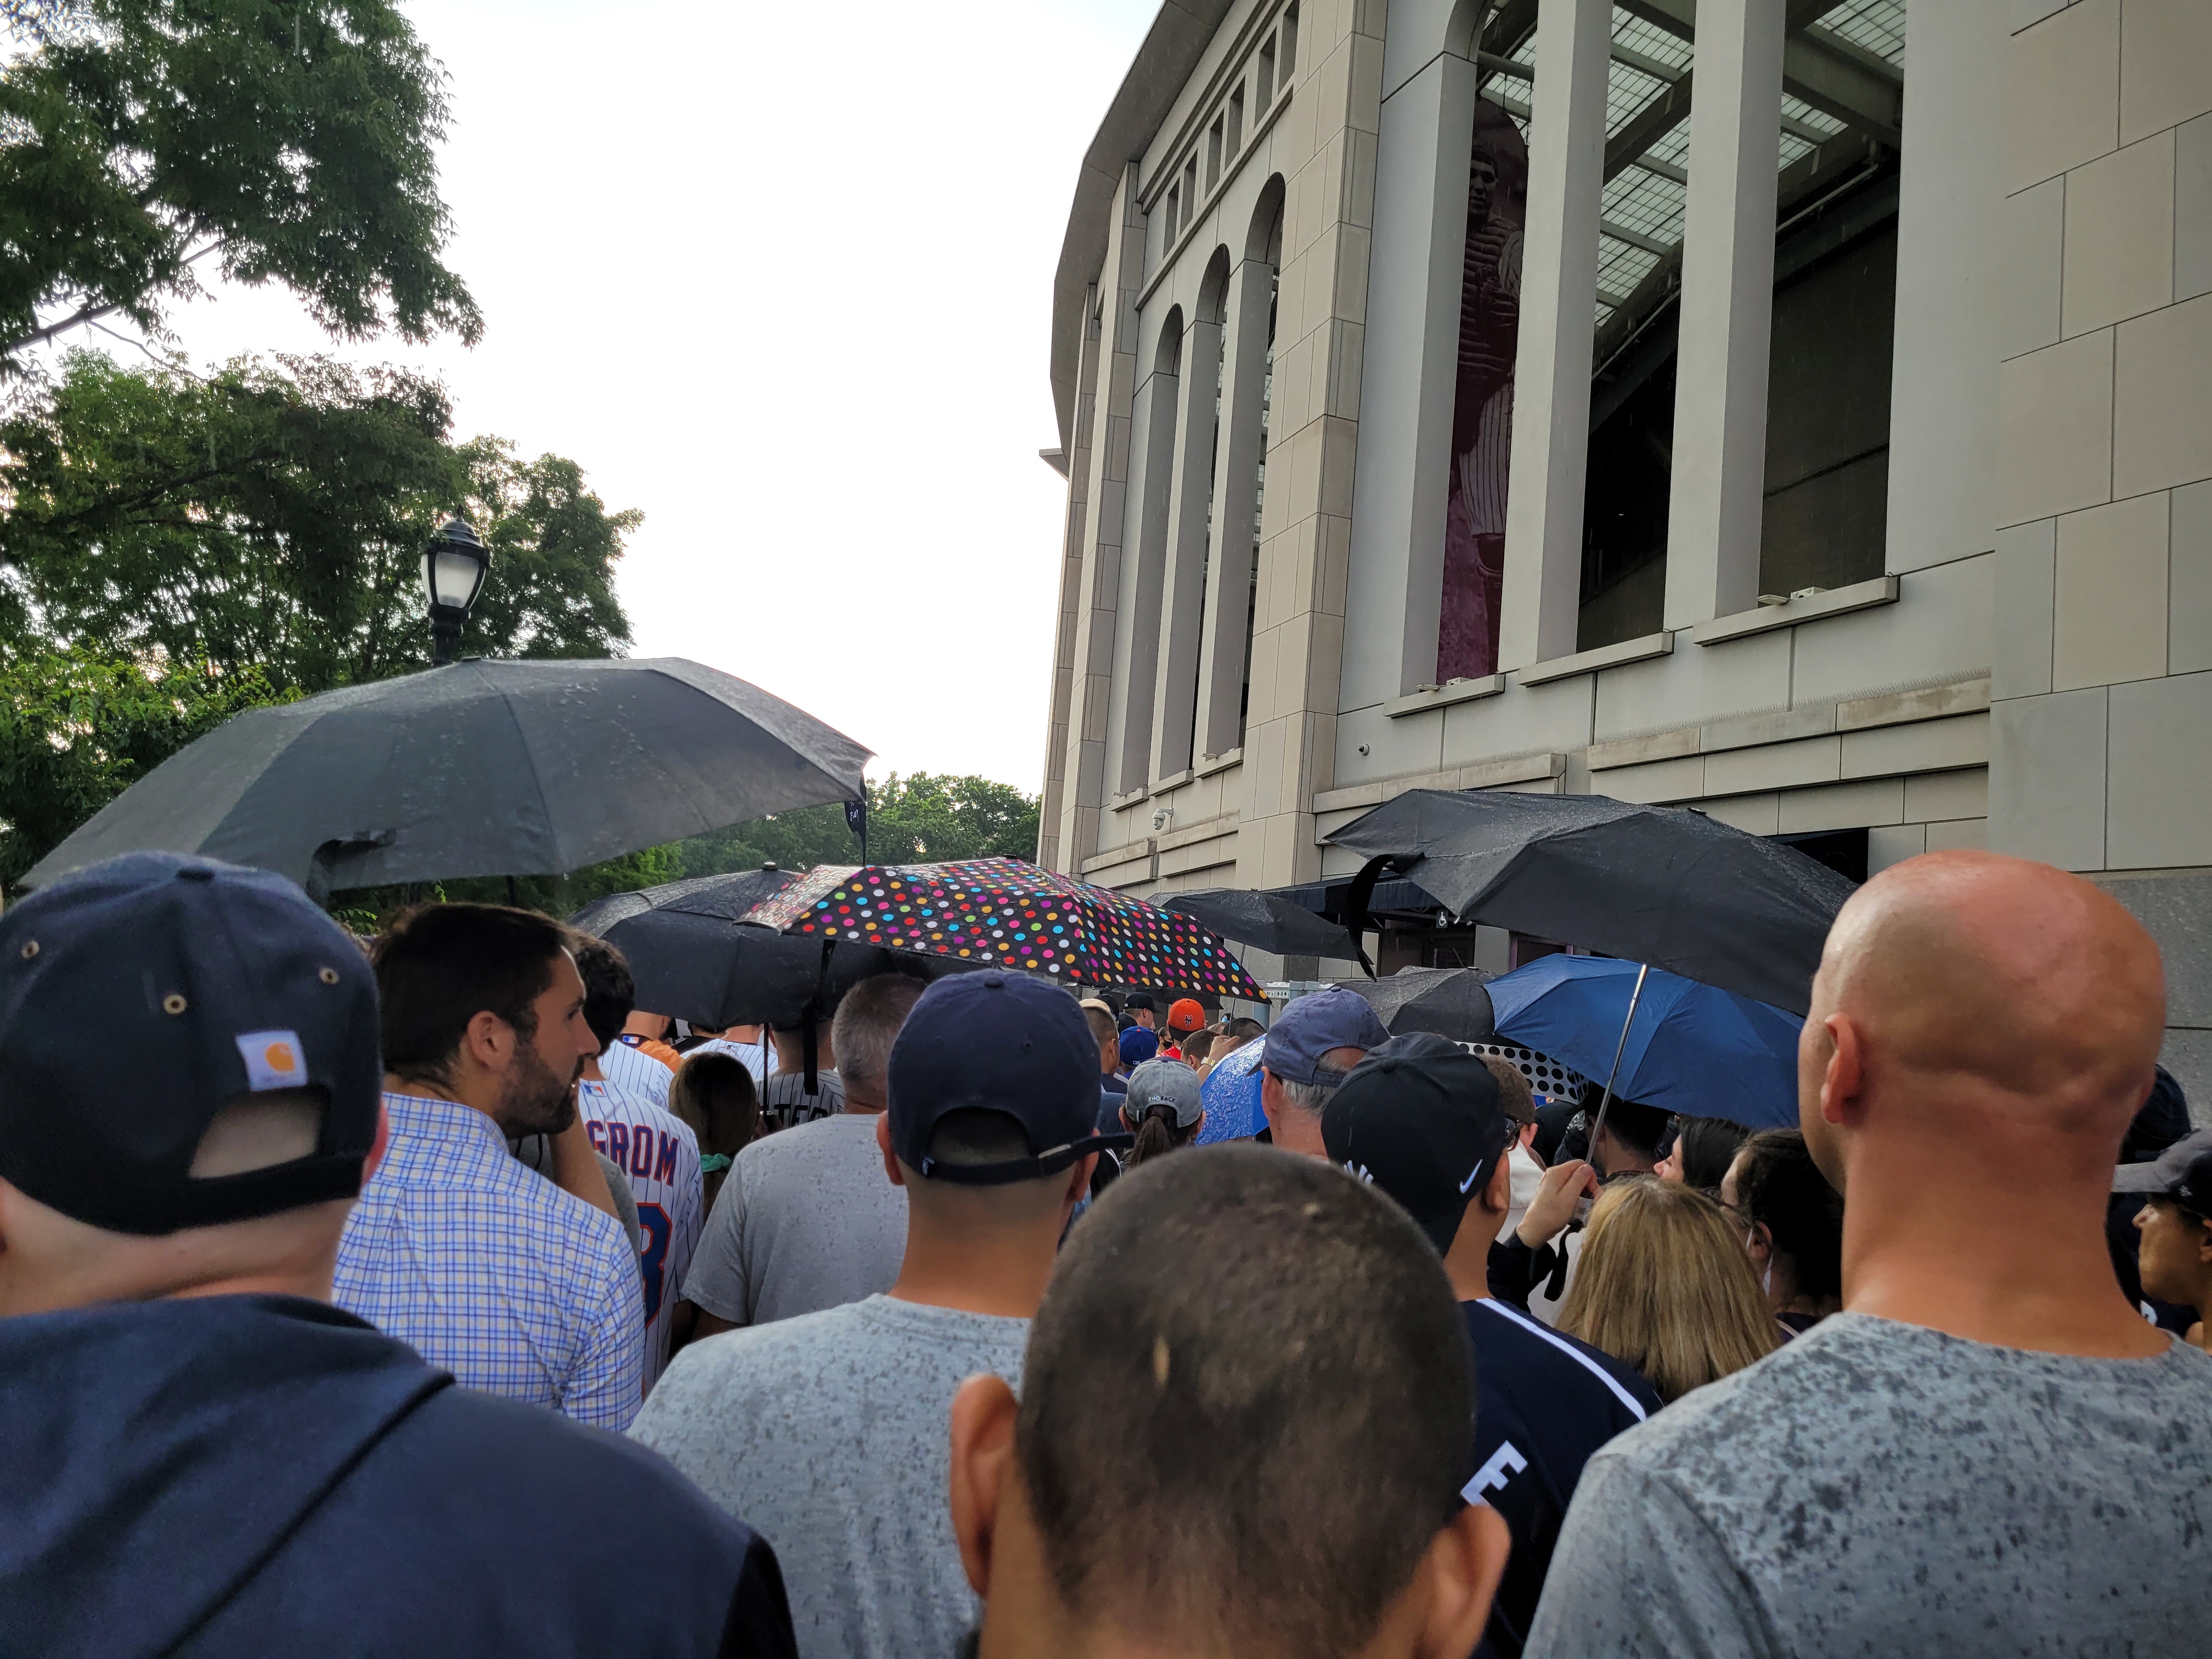 My rainy report for Game 1 of the Subway Series